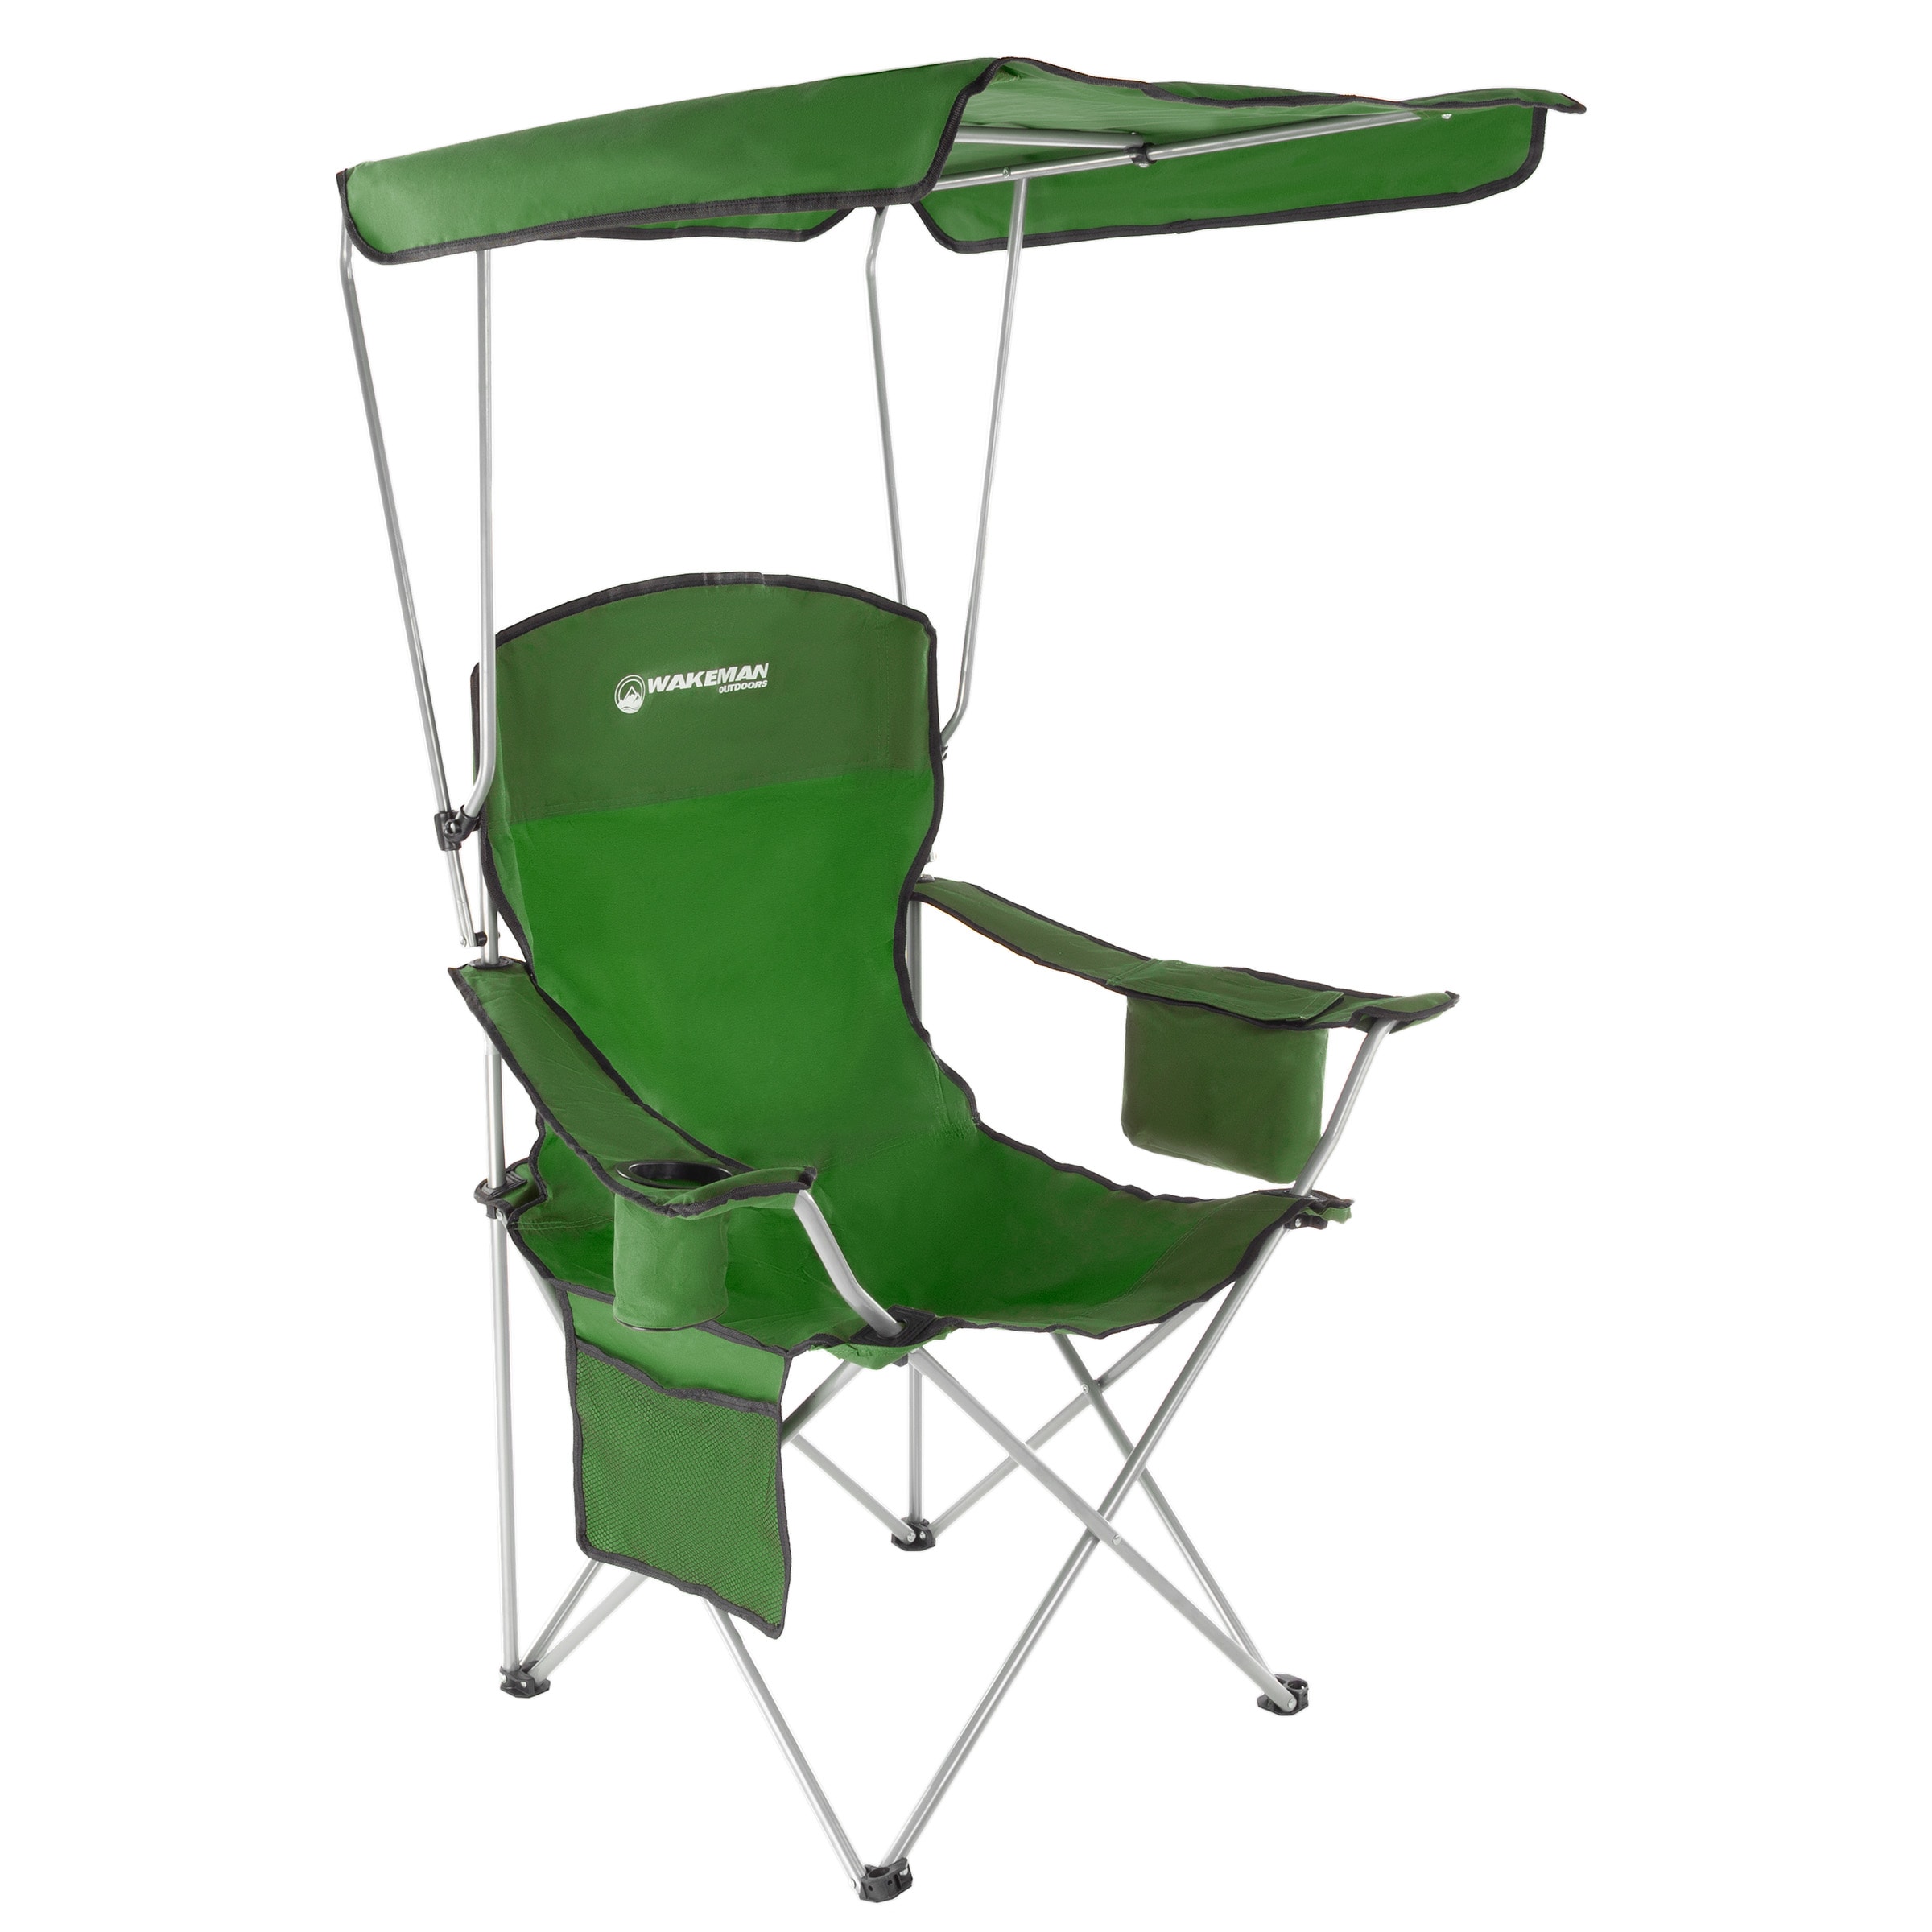 Leisure Sports Green Folding Camping Chair at